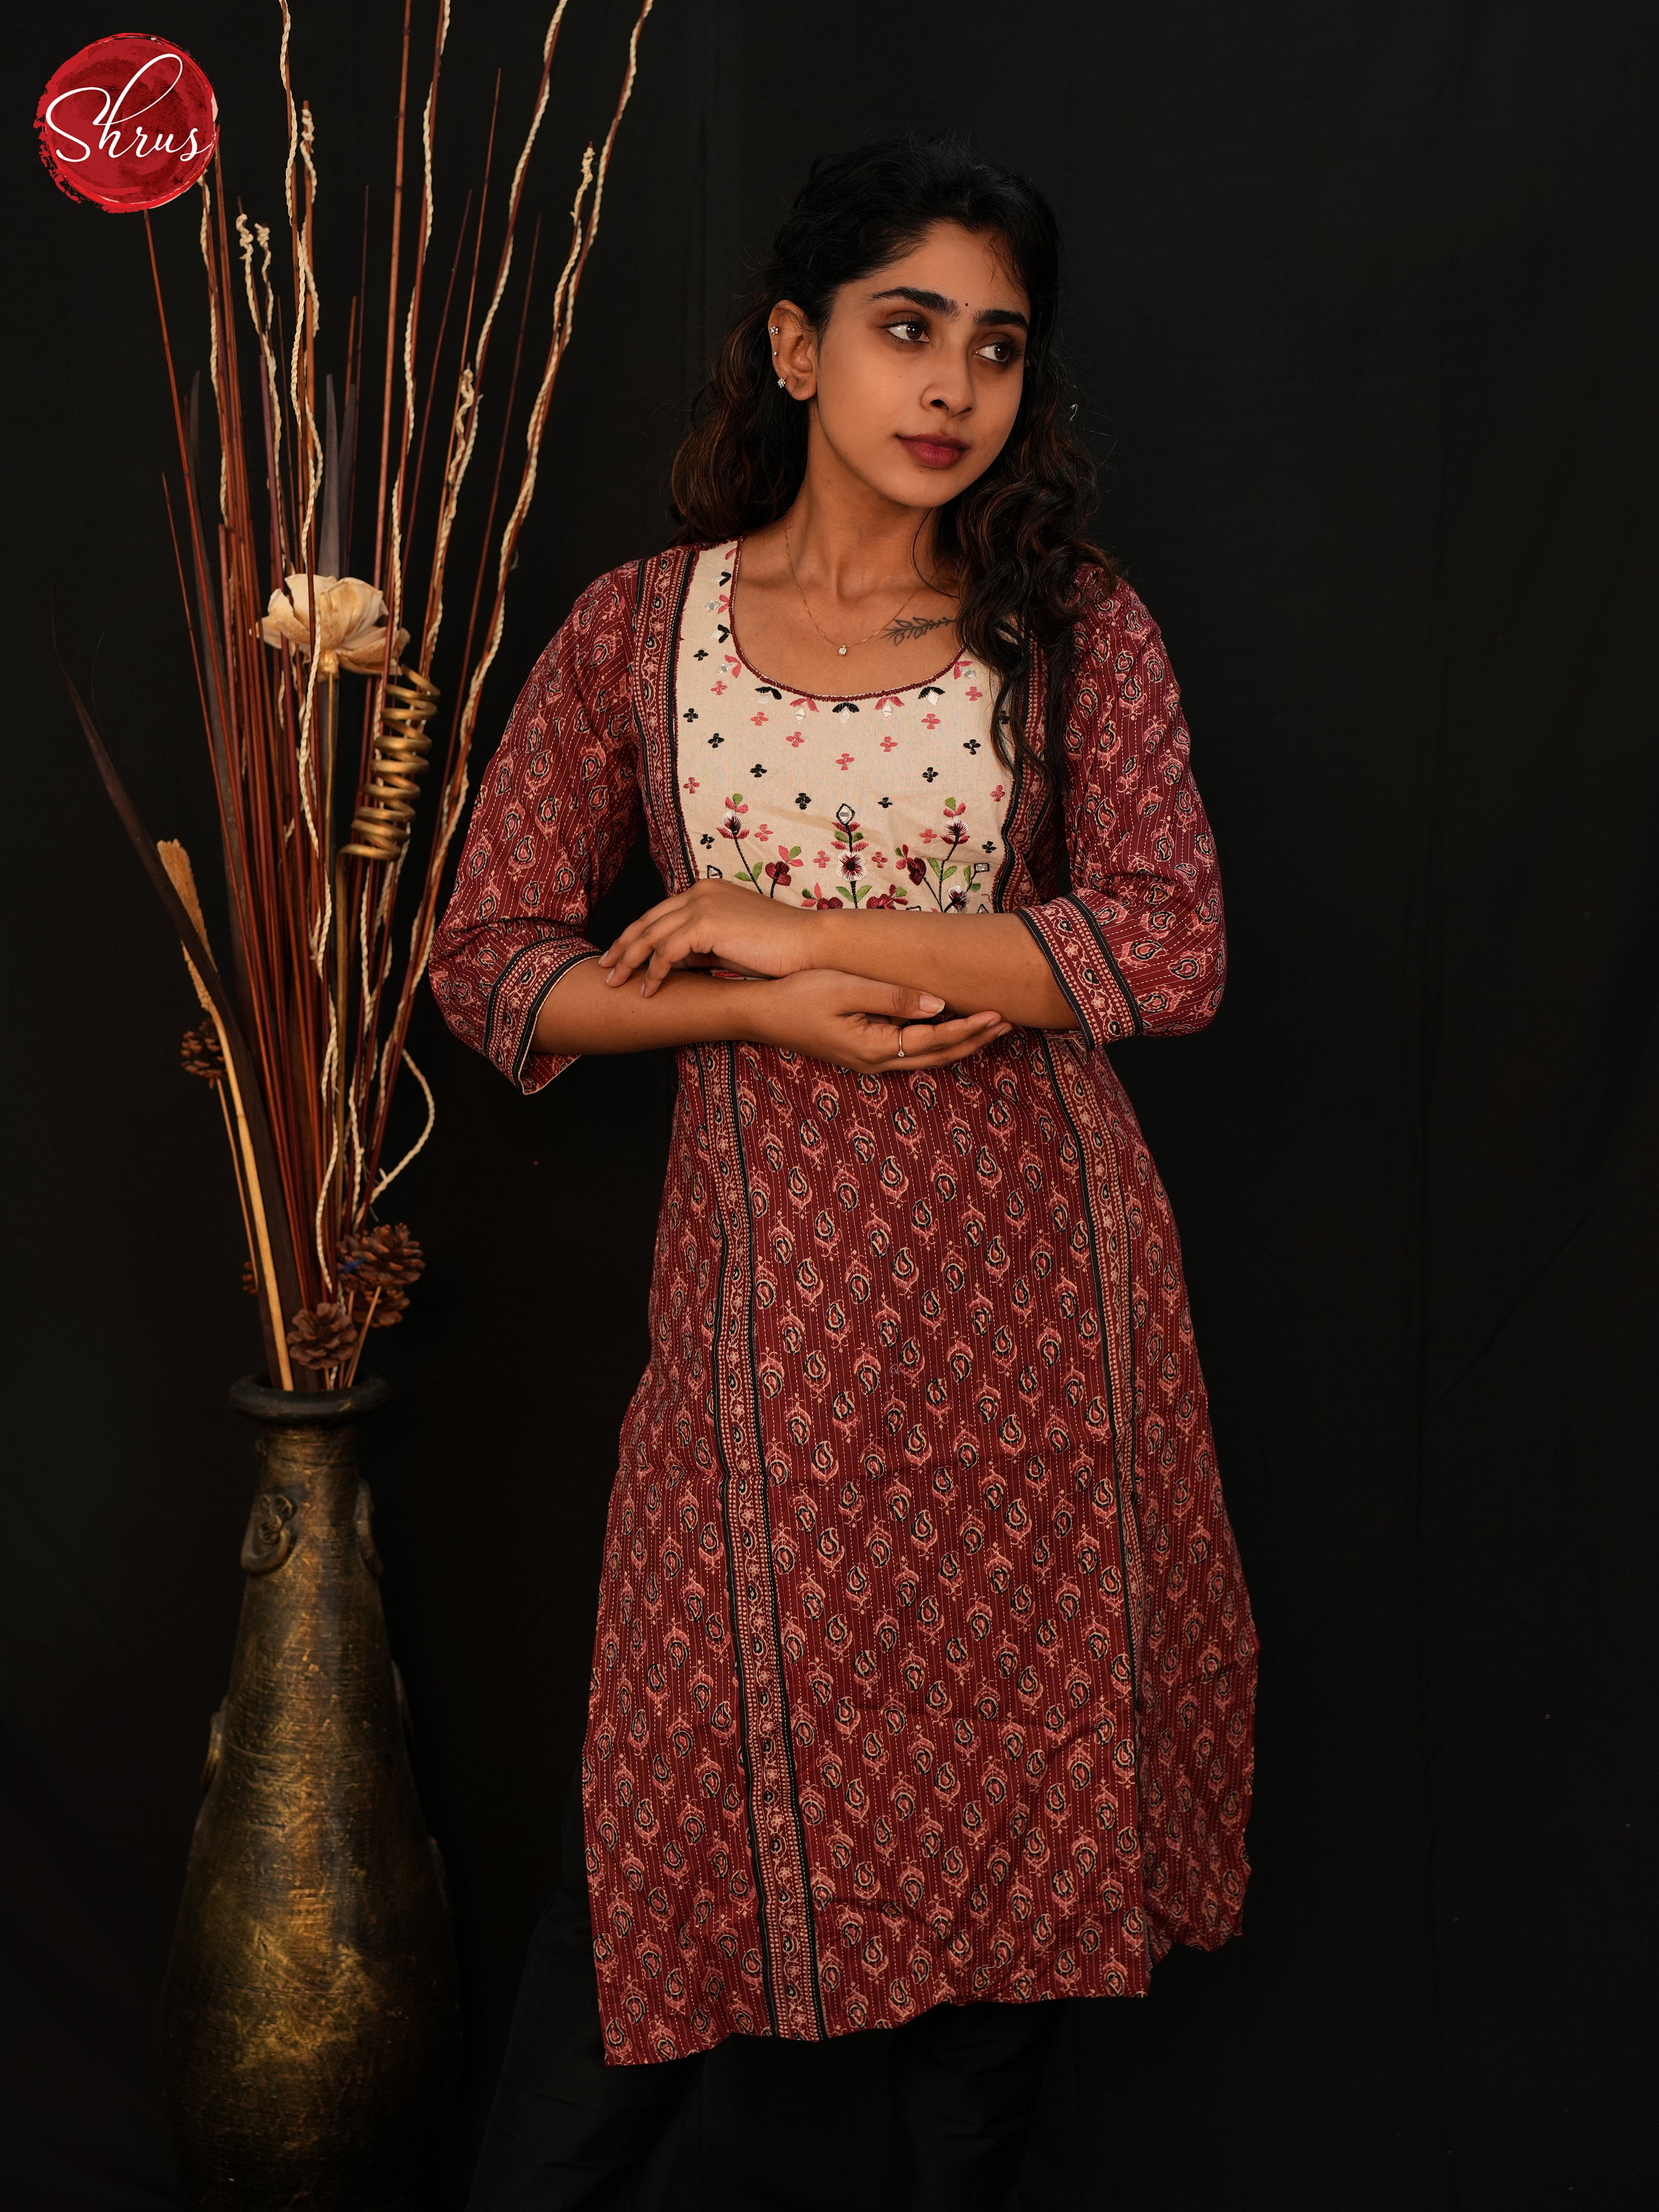 Brown & White - Readymade Cotton Straight Kurti with floral print - Shop on ShrusEternity.com